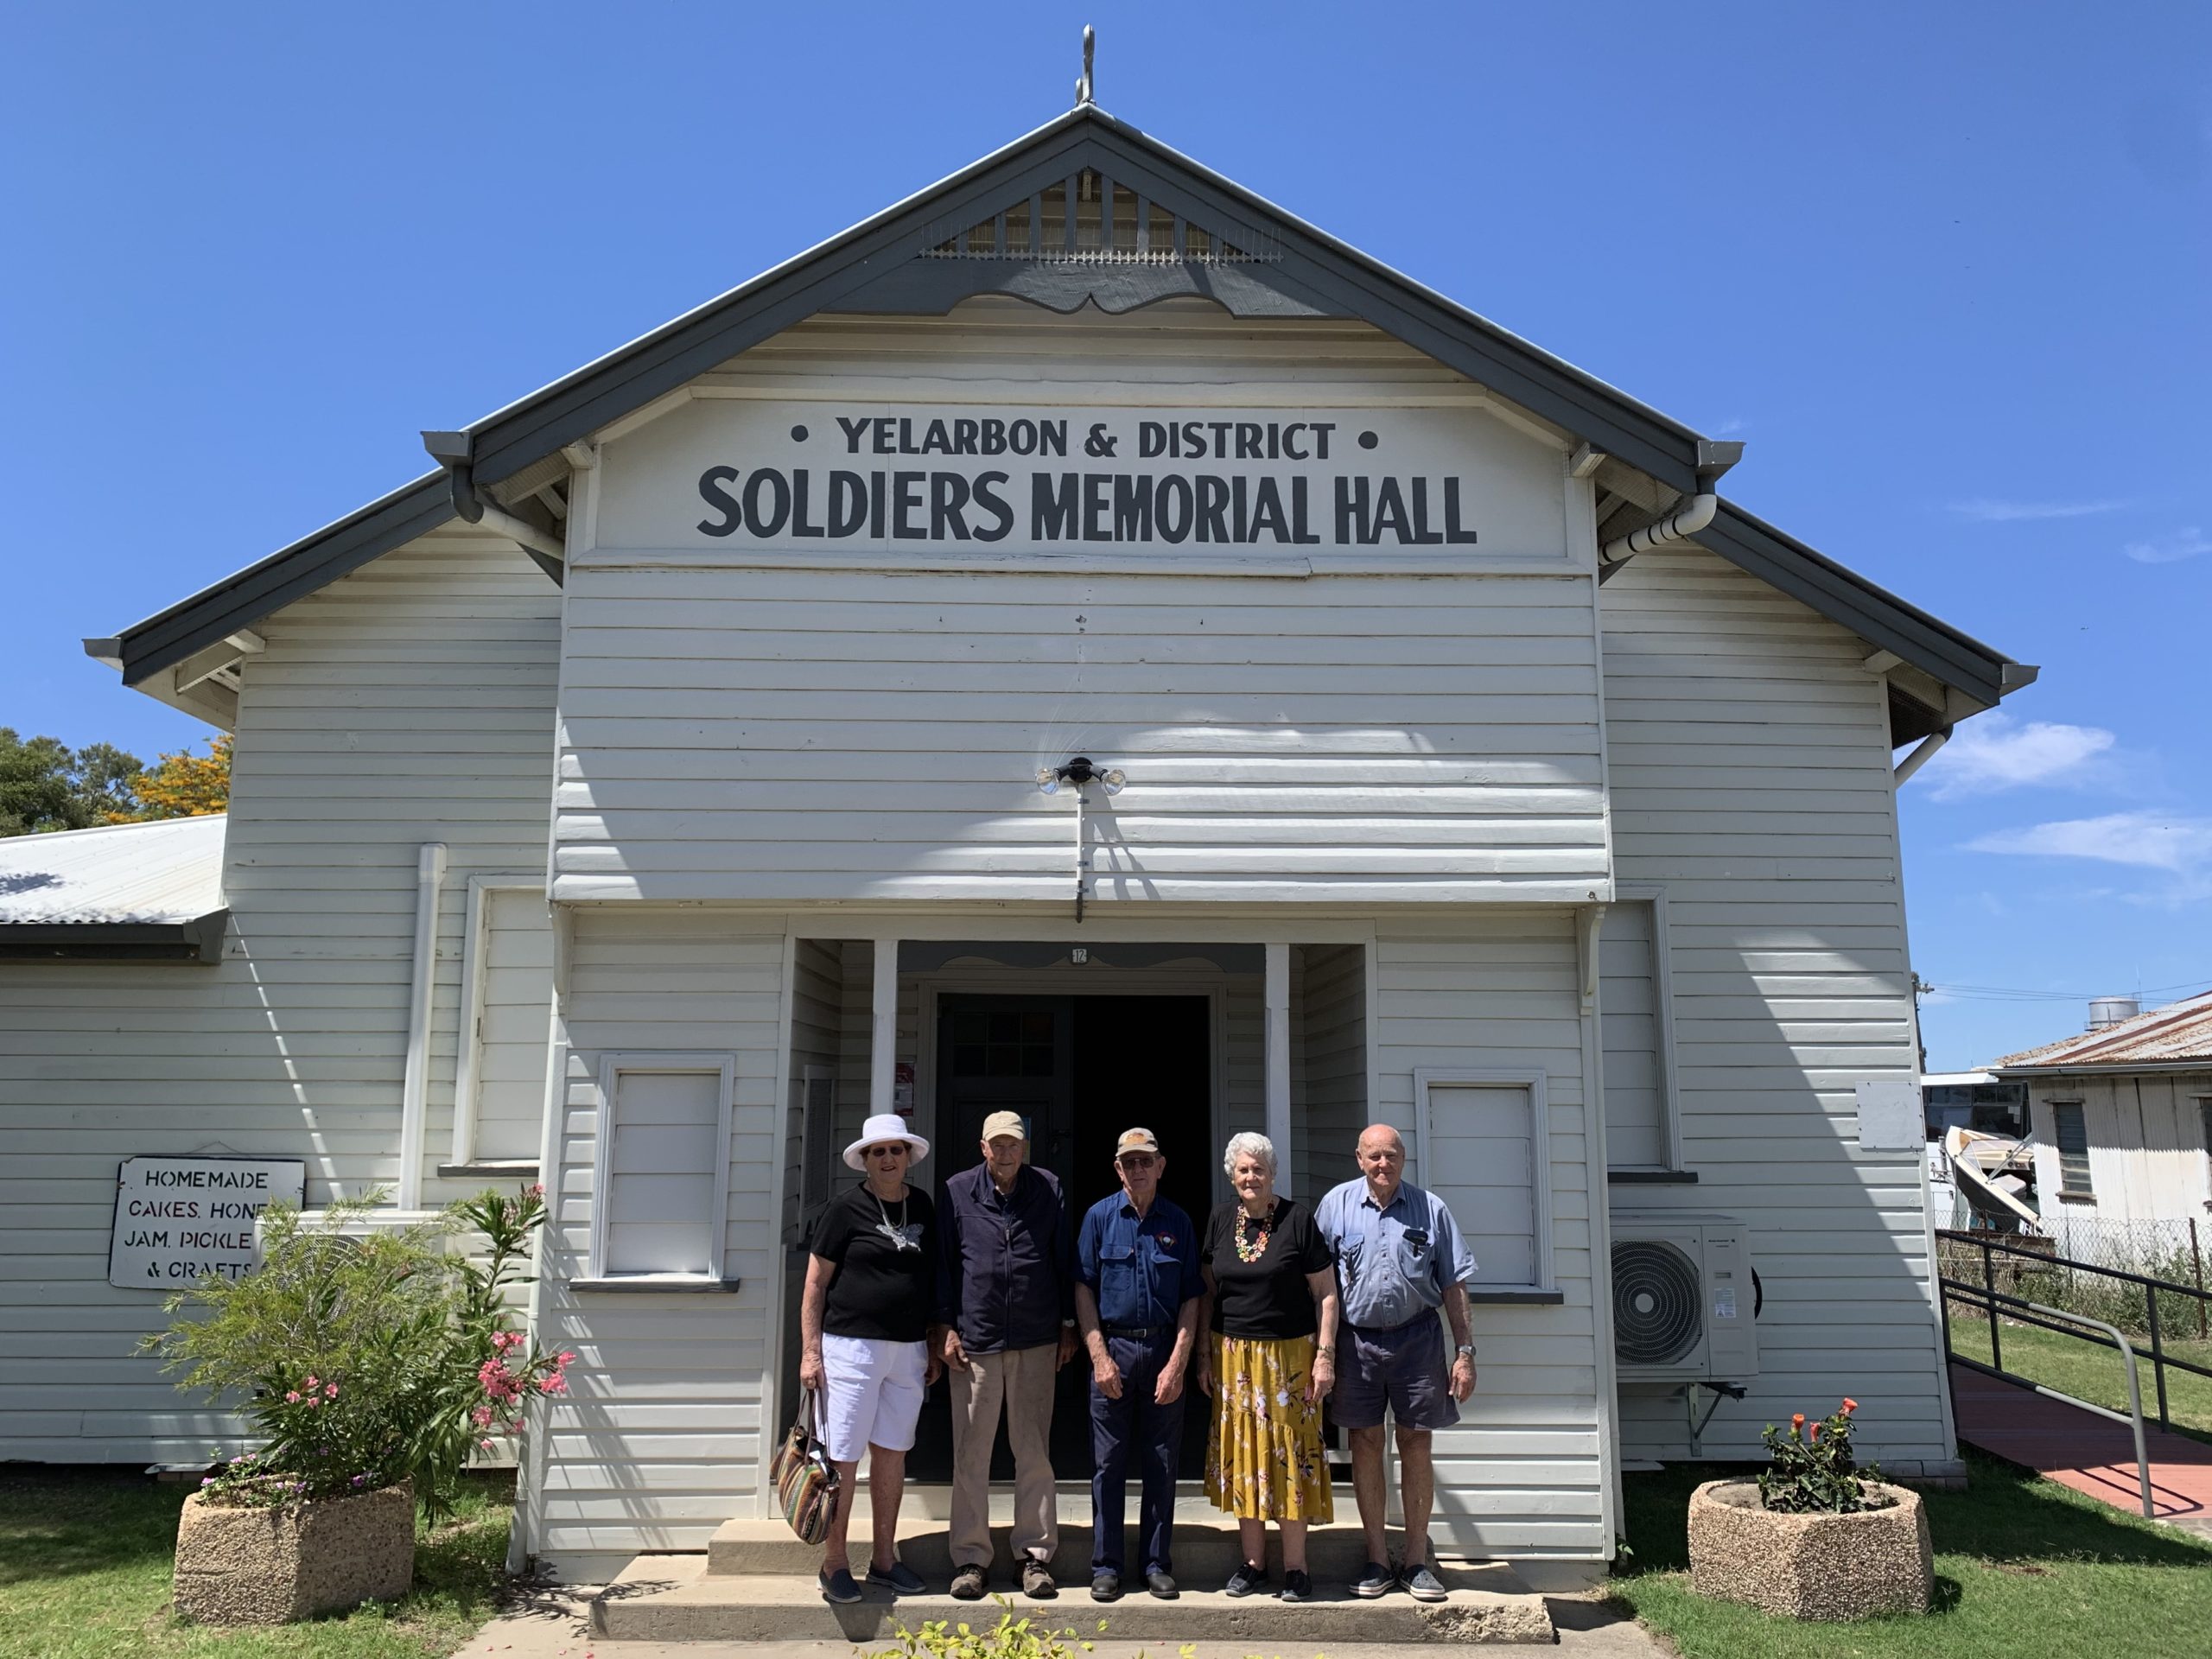 nland Rail Community Sponsorships and Donations Program recipients, the Yelarbon RSL Memorial Hall Restoration Committee, standing in a group out the front of the hall